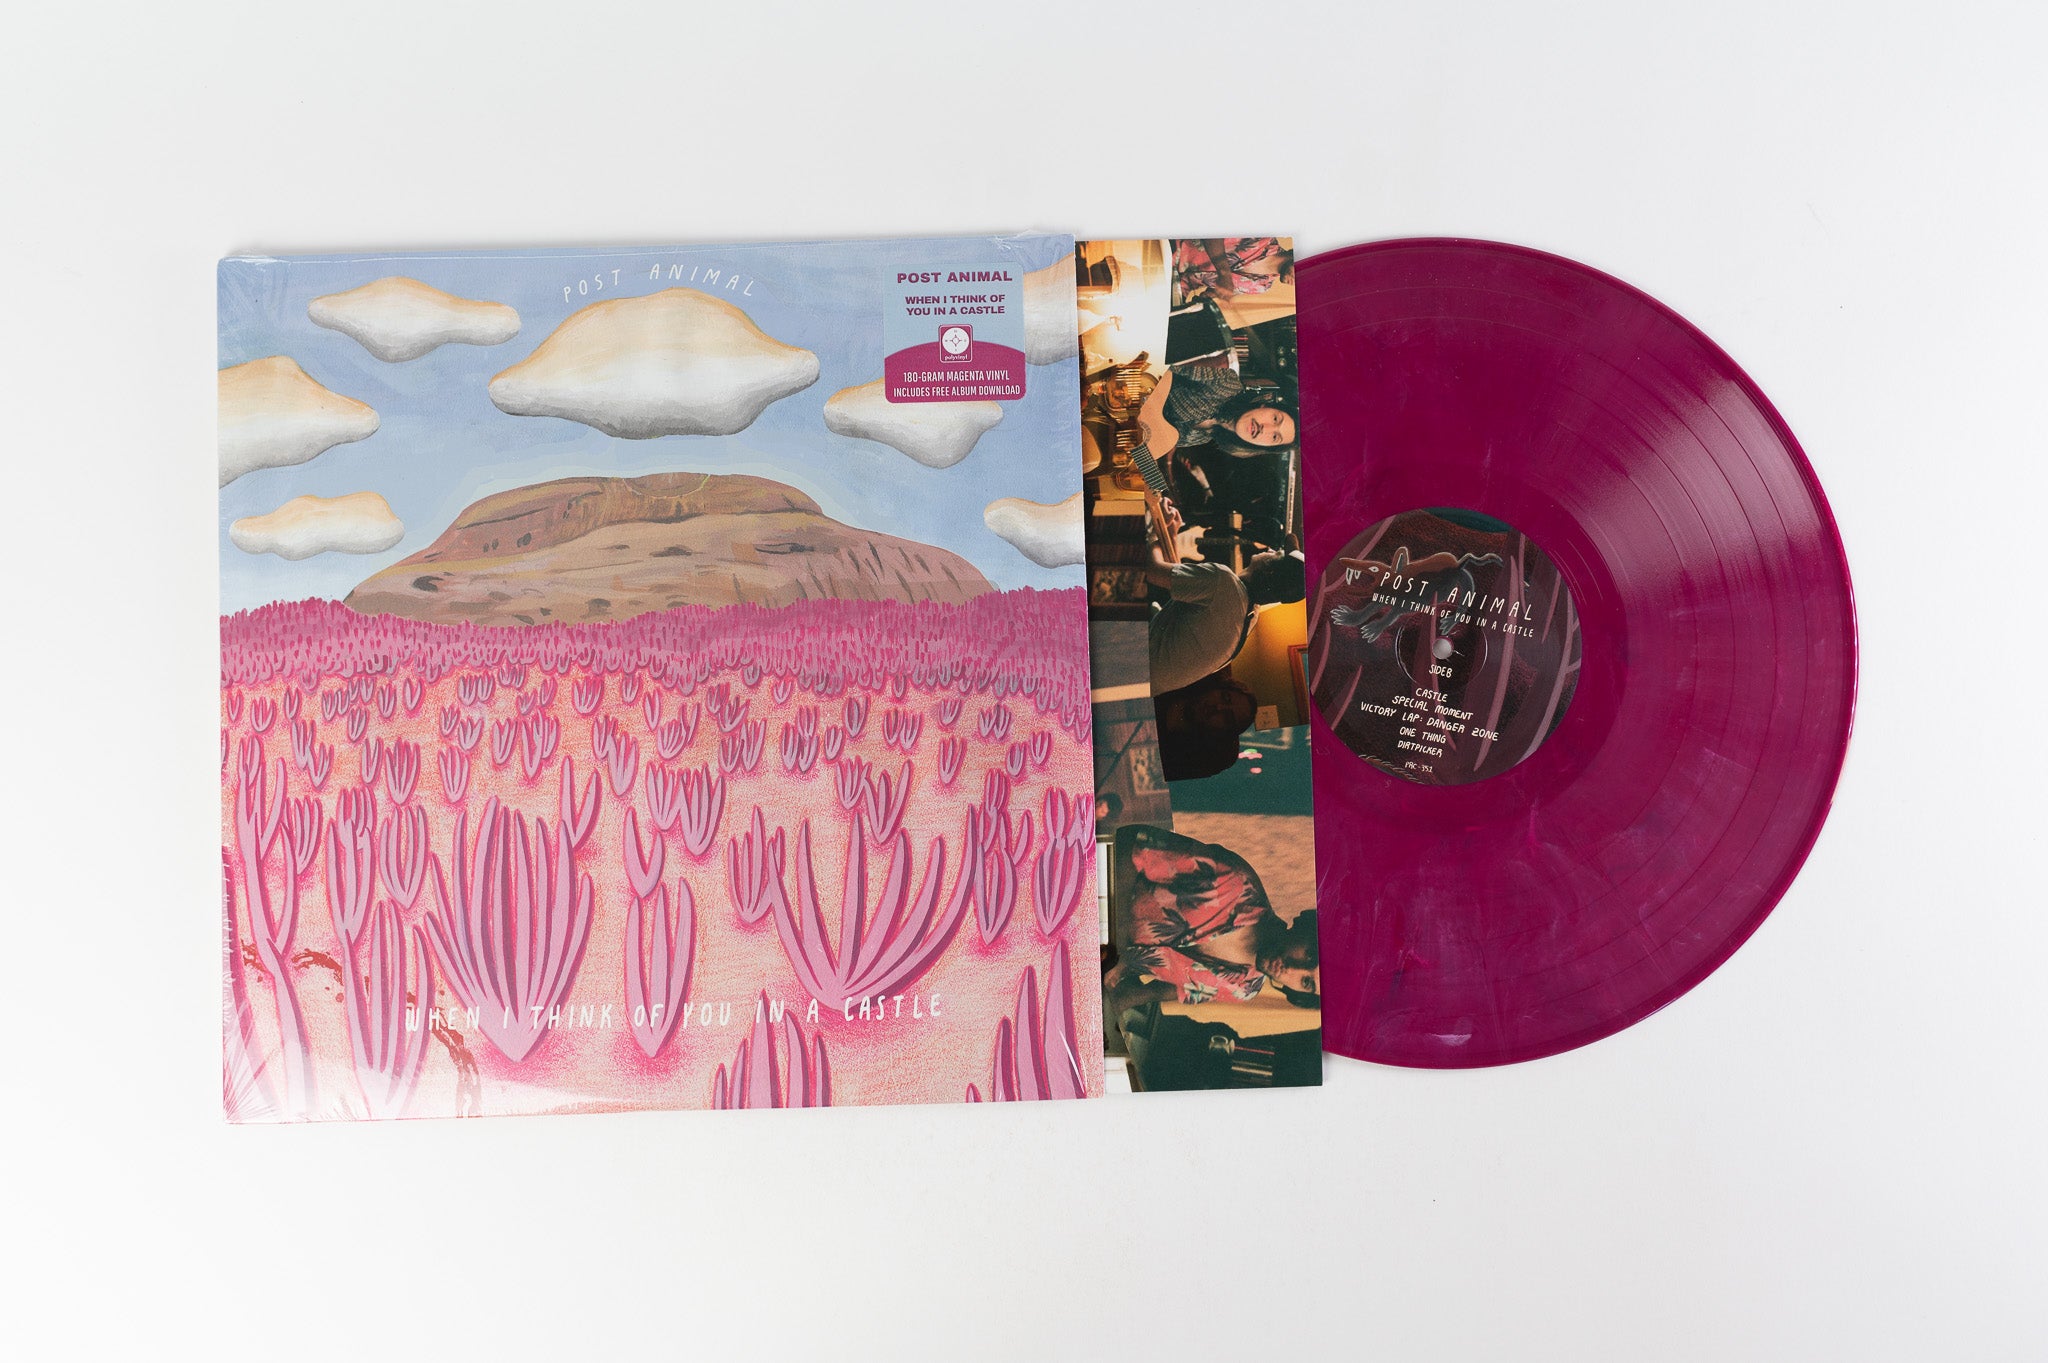 Post Animal - When I Think Of You In A Castle on Polyvinyl Magenta Vinyl